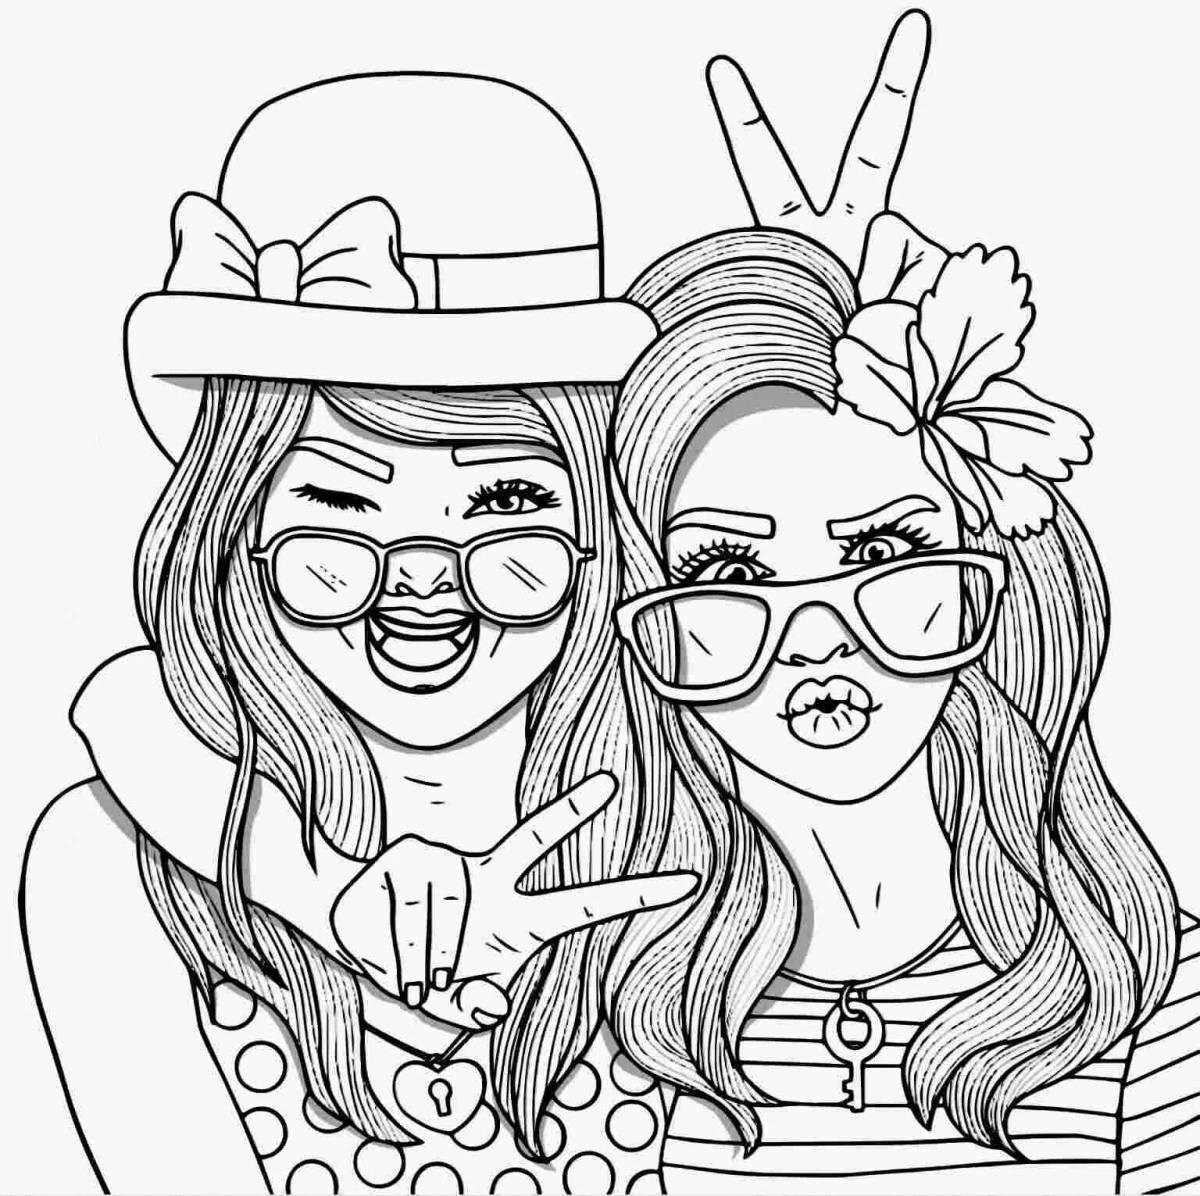 Animated coloring page 12 cool